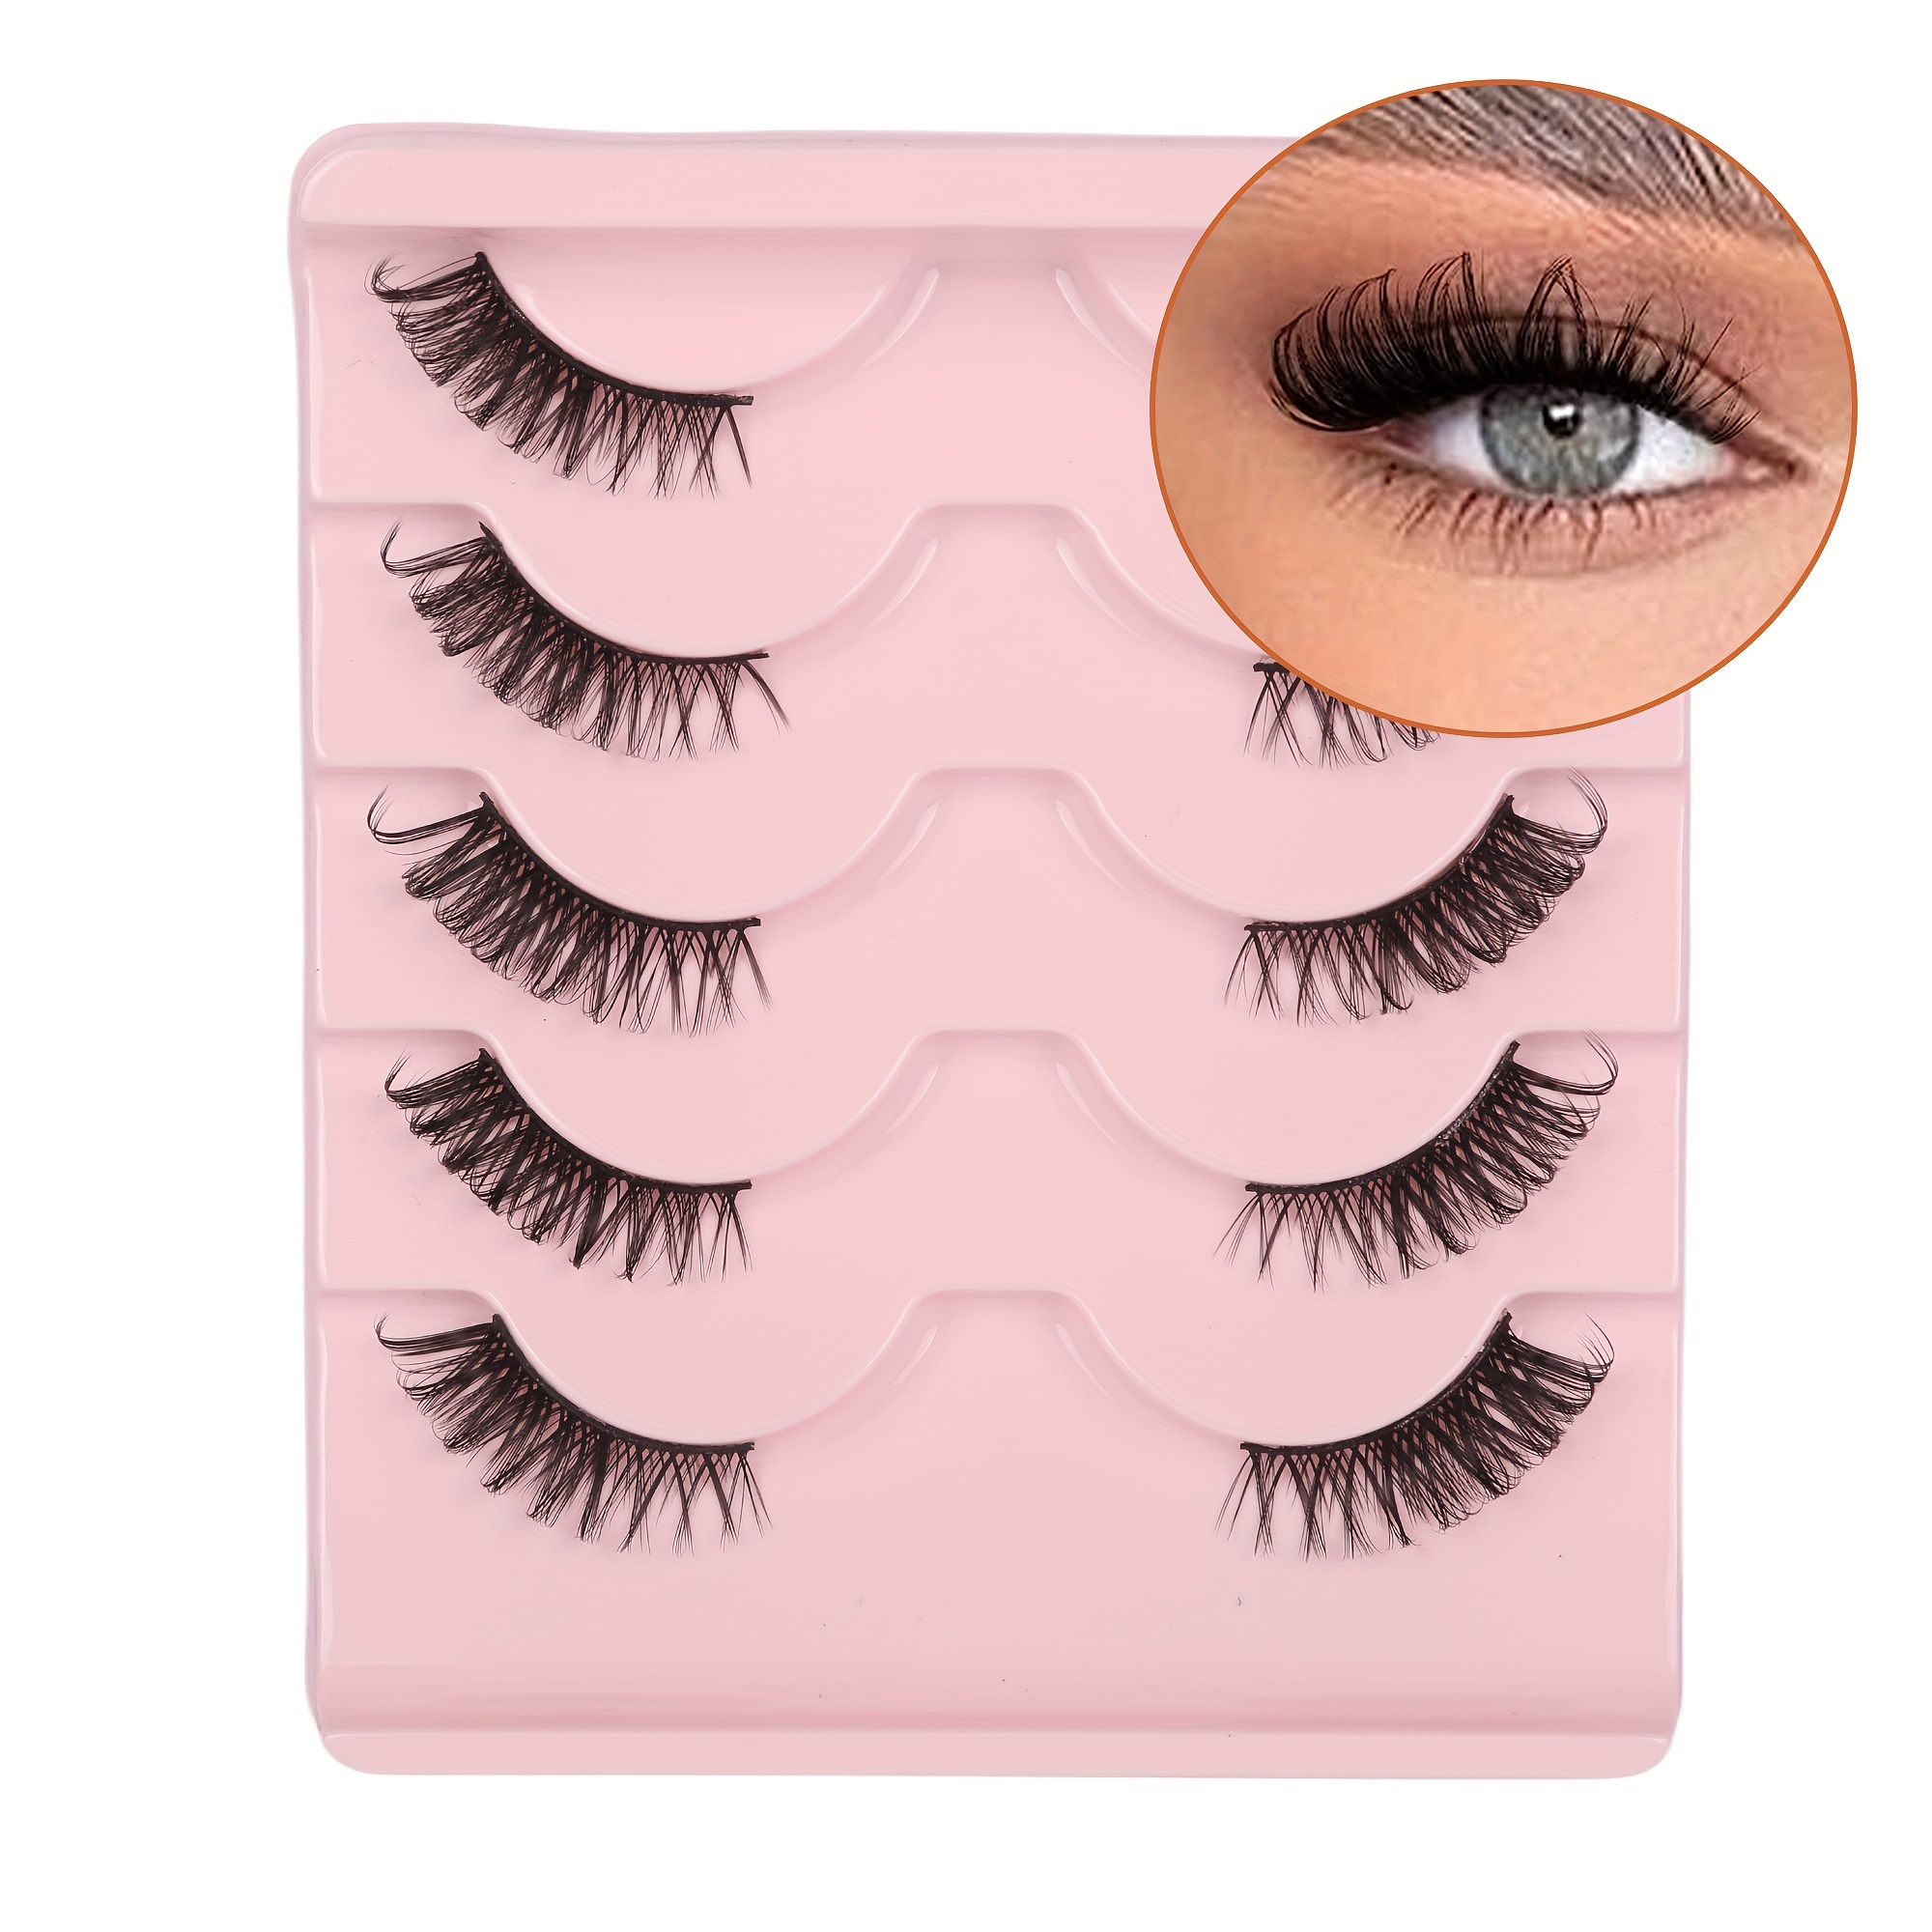 

Half Eye Lashes Natural Look Lash Extension Russian Strip Lashes Fluffy Faux Mink Lashes ( 5 Pairs )